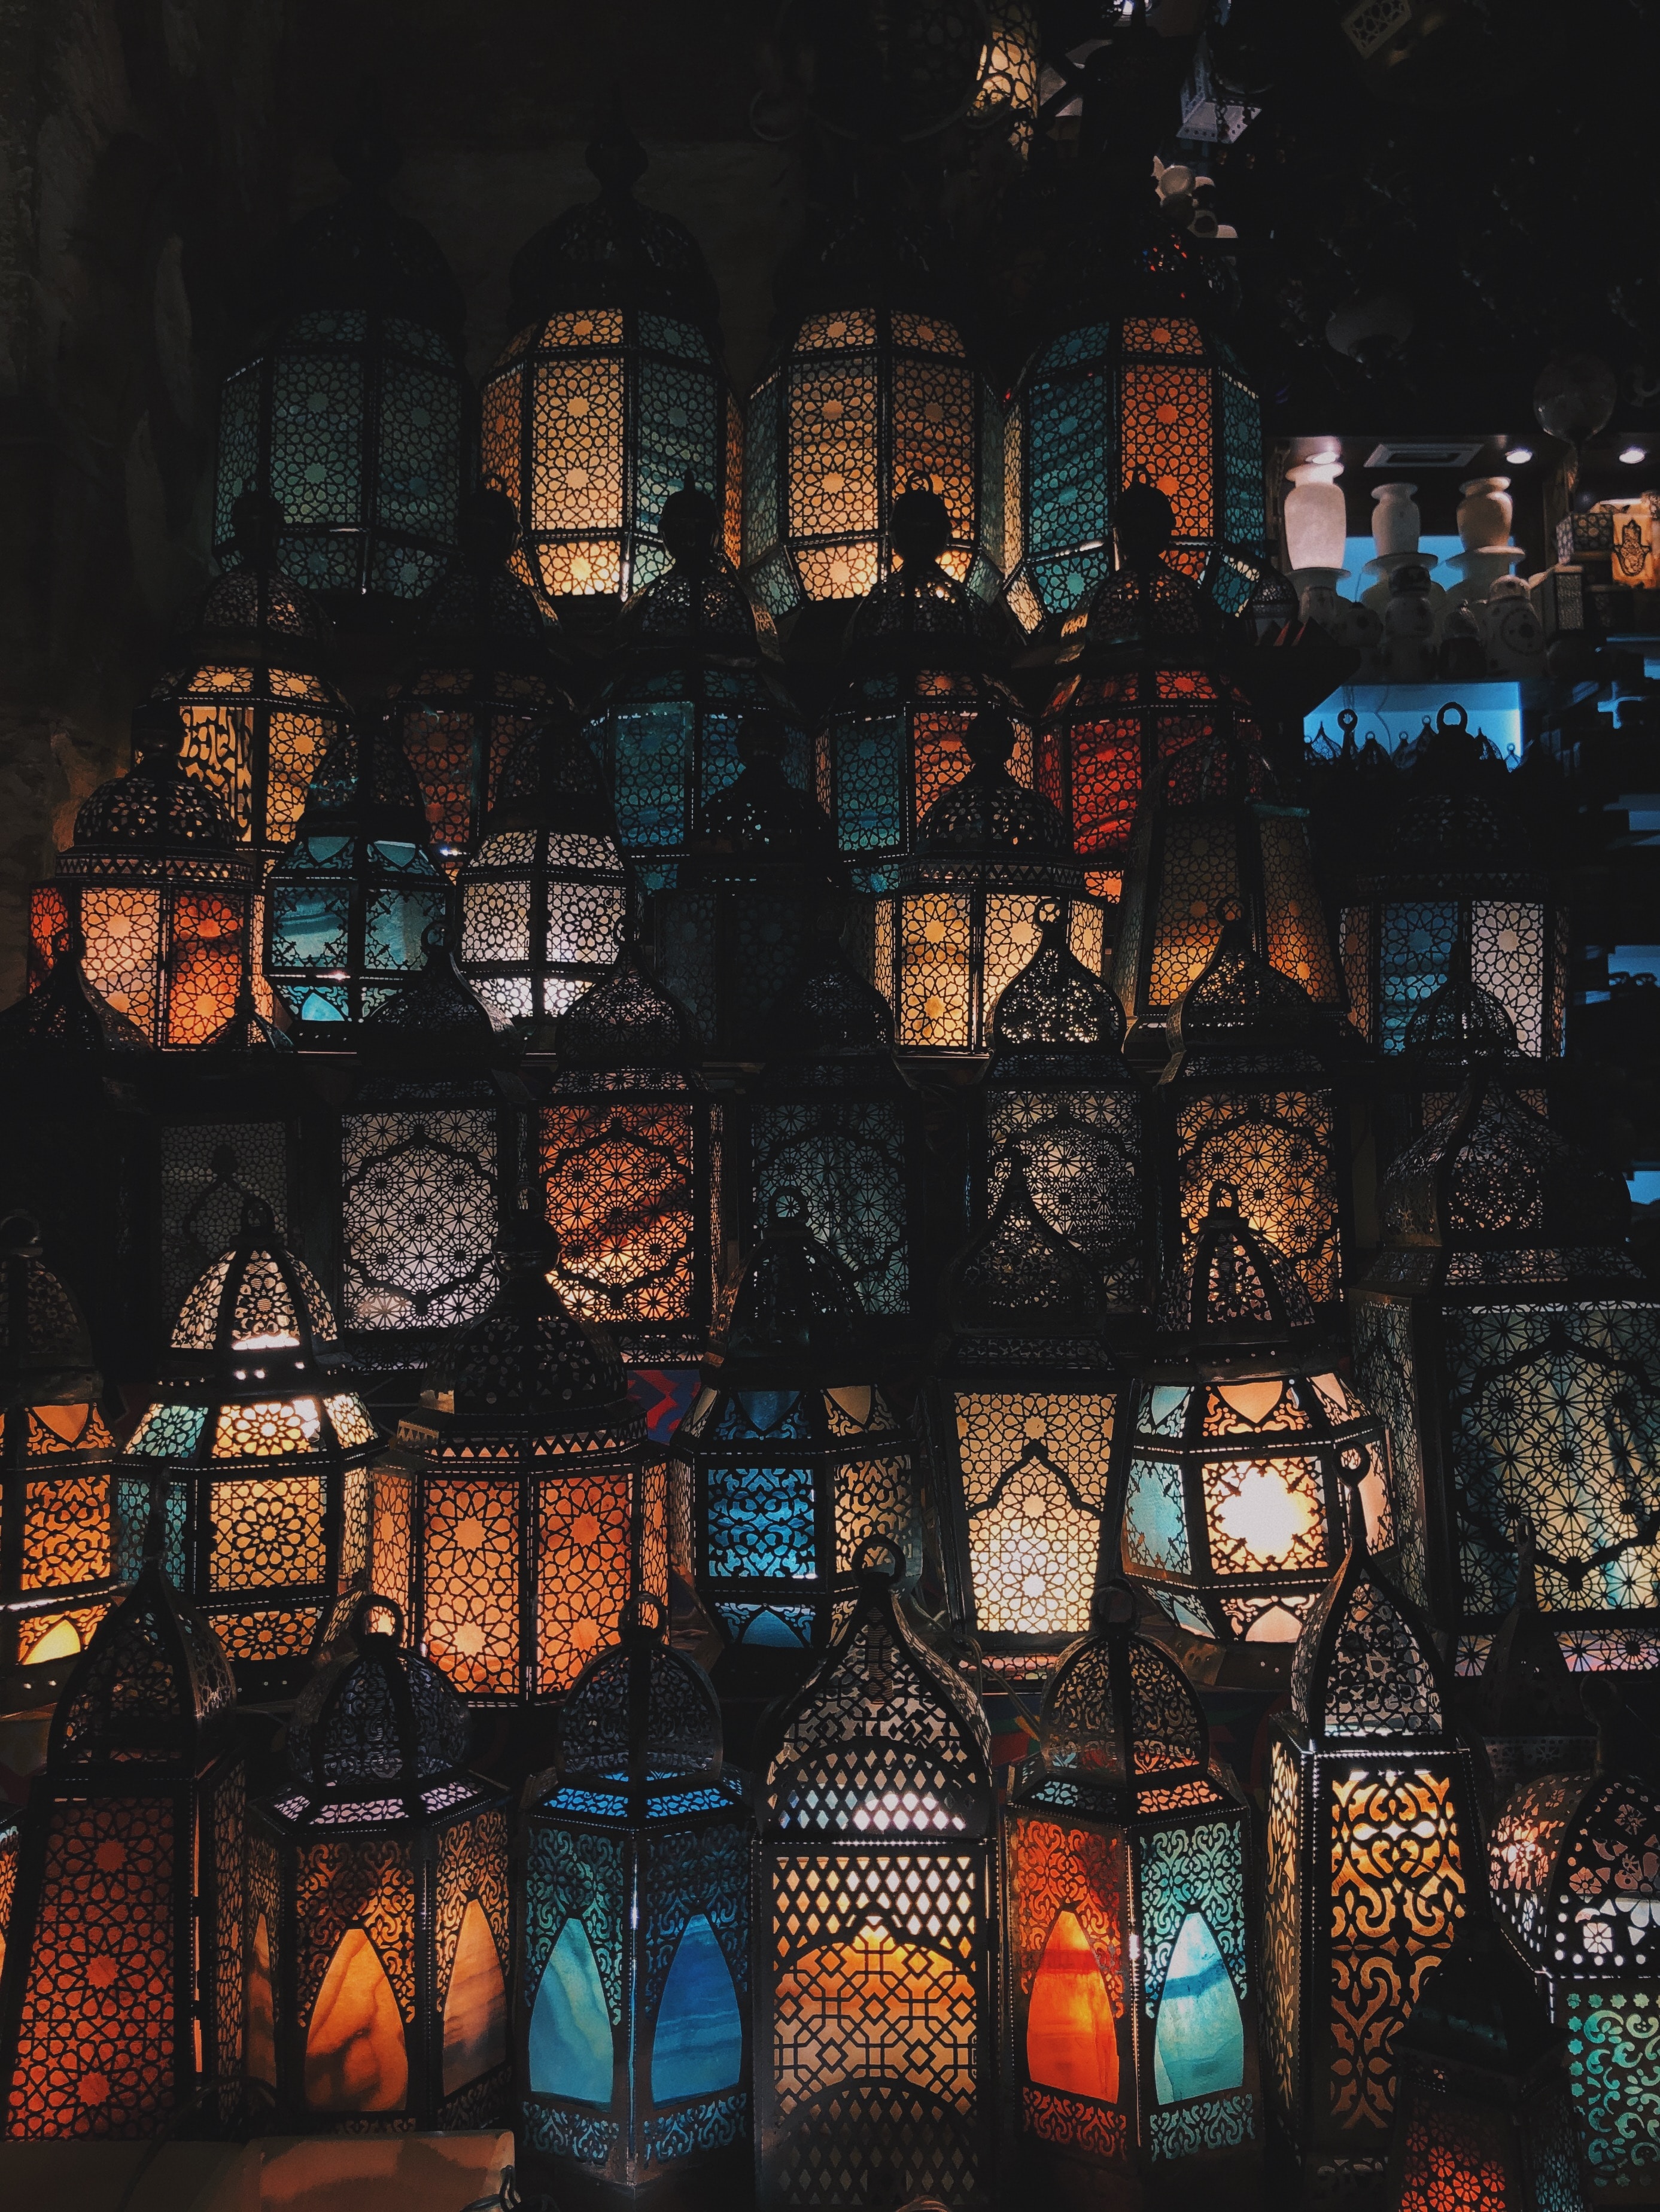 A wall of bright colorful exotic lanterns stacked above each other.